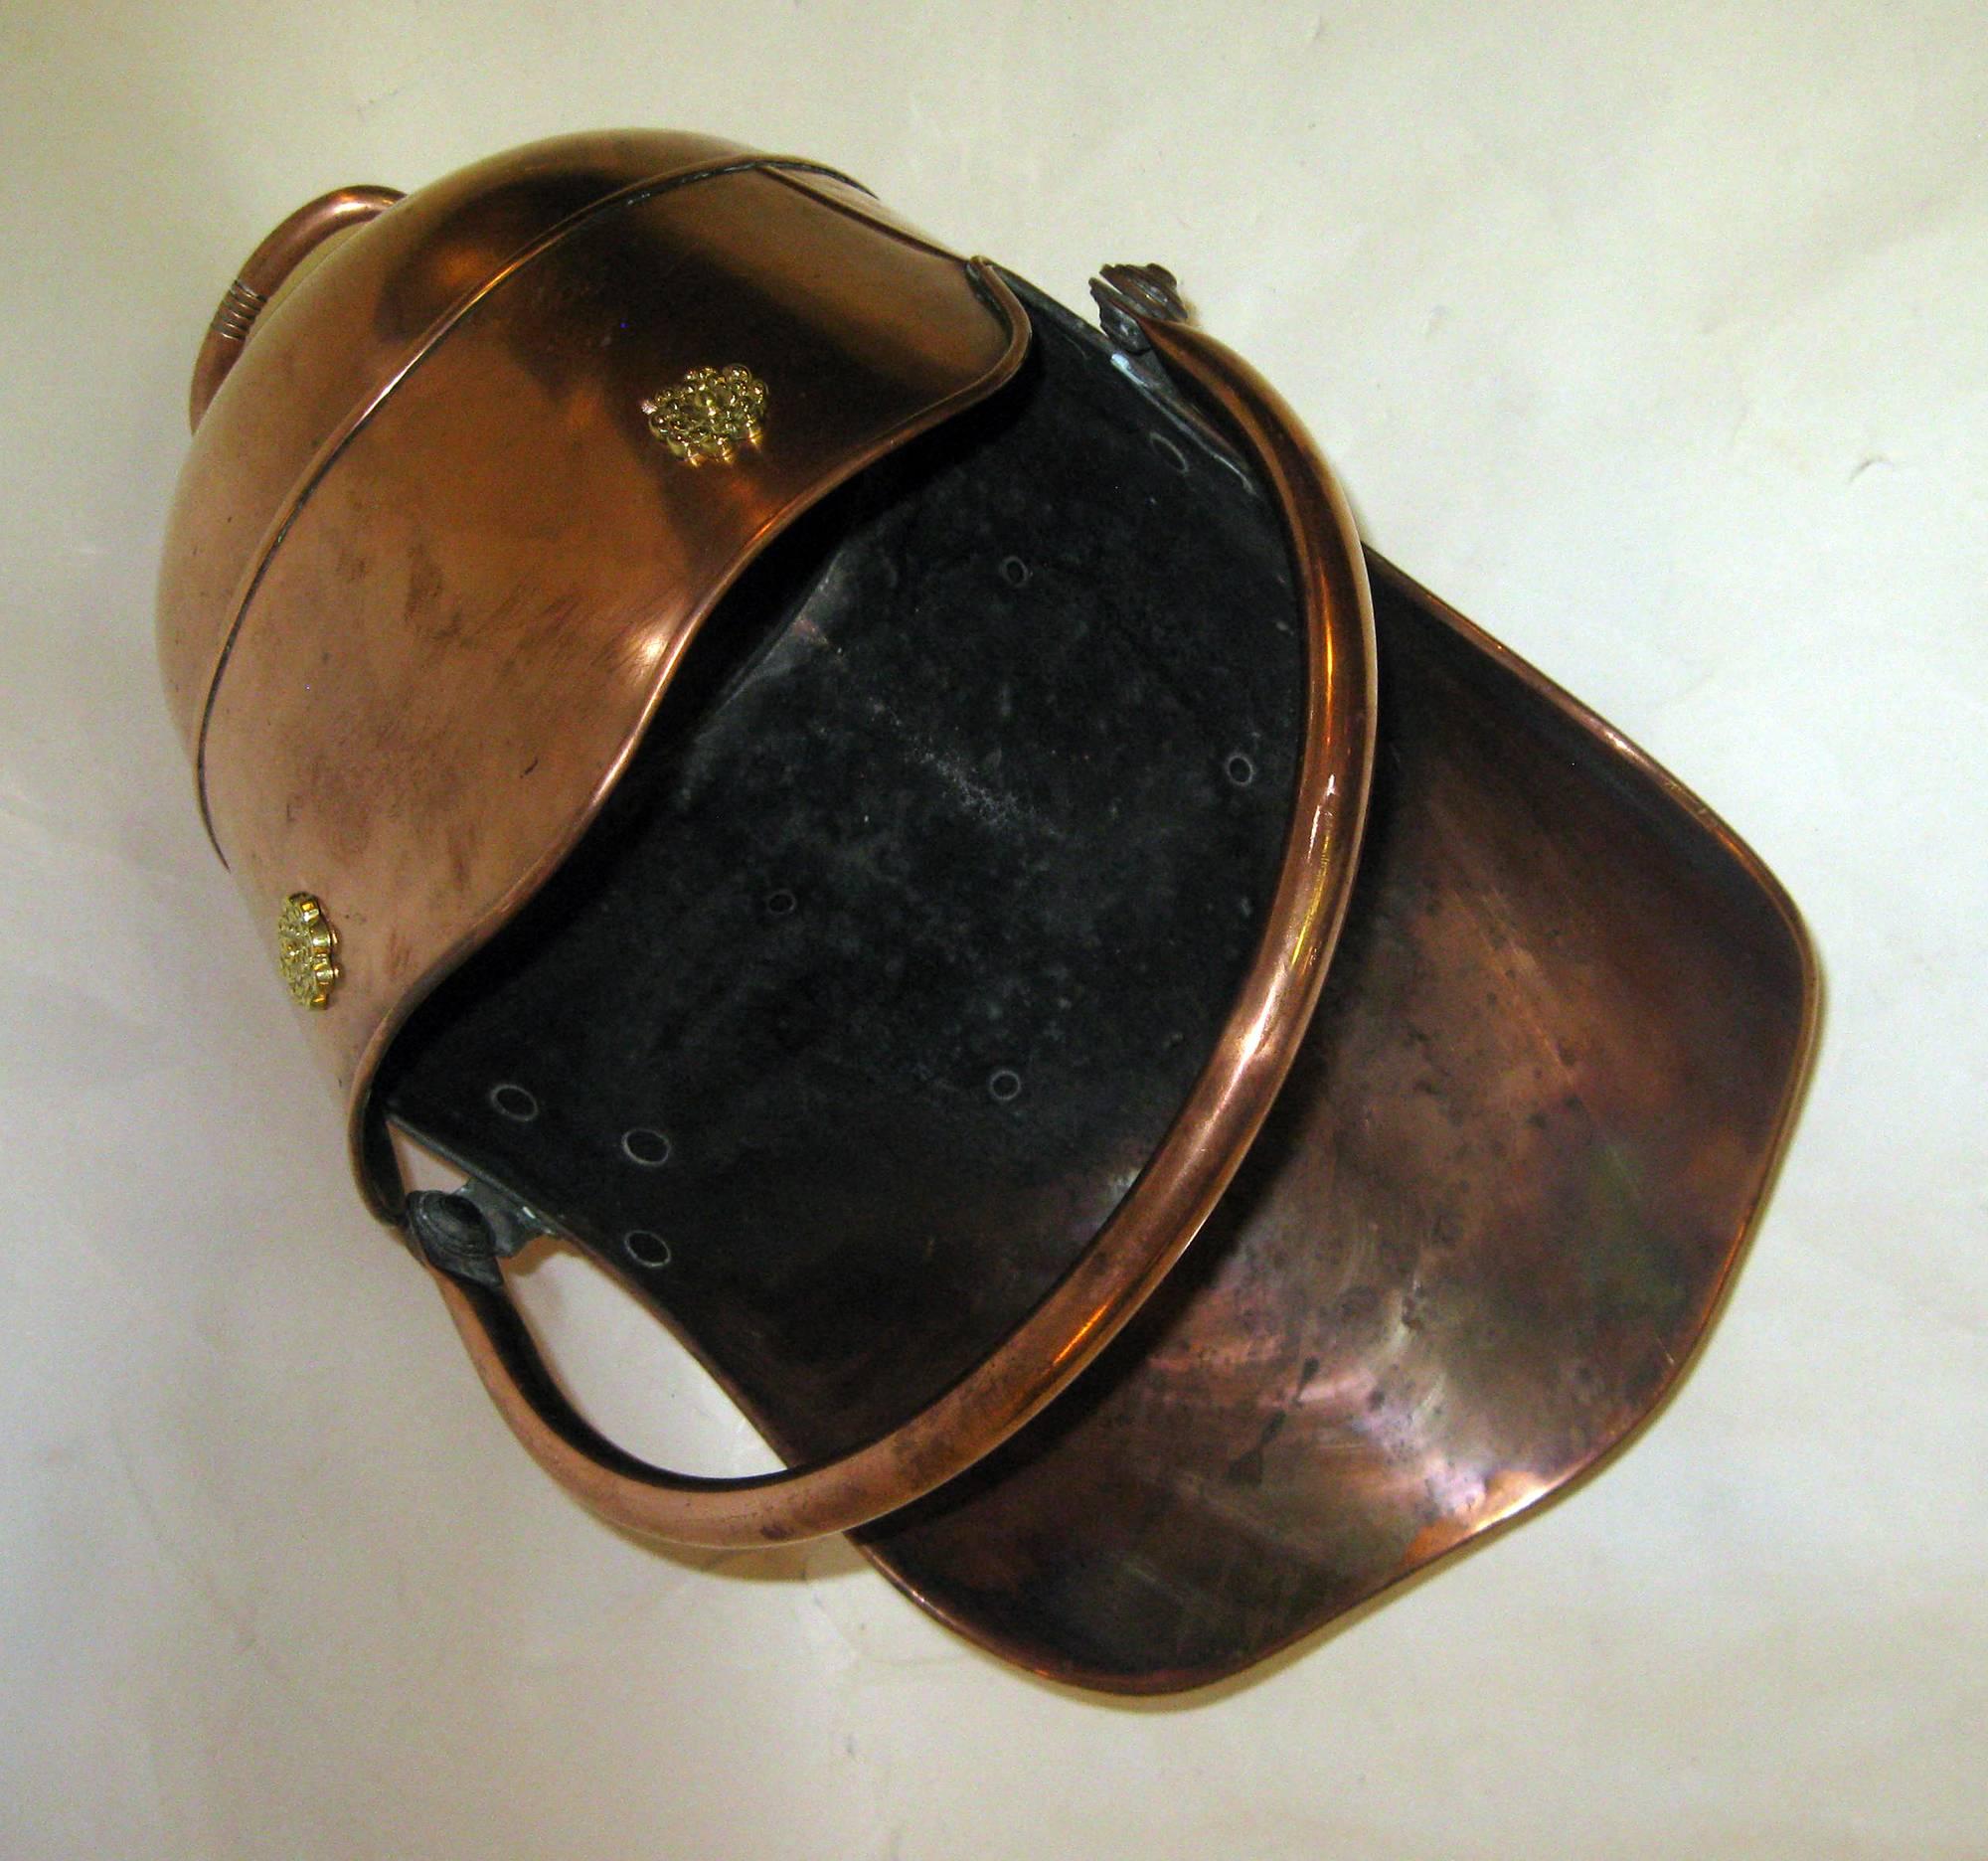 Scottish Helmet shaped coal scuttle/ hod with nice form, shape and size. Adjustable handle riveted to back with applied brass ornamentation at top. 
Measures: 16 inches tall when handle is up-14 inches when down.
See other measurements below.